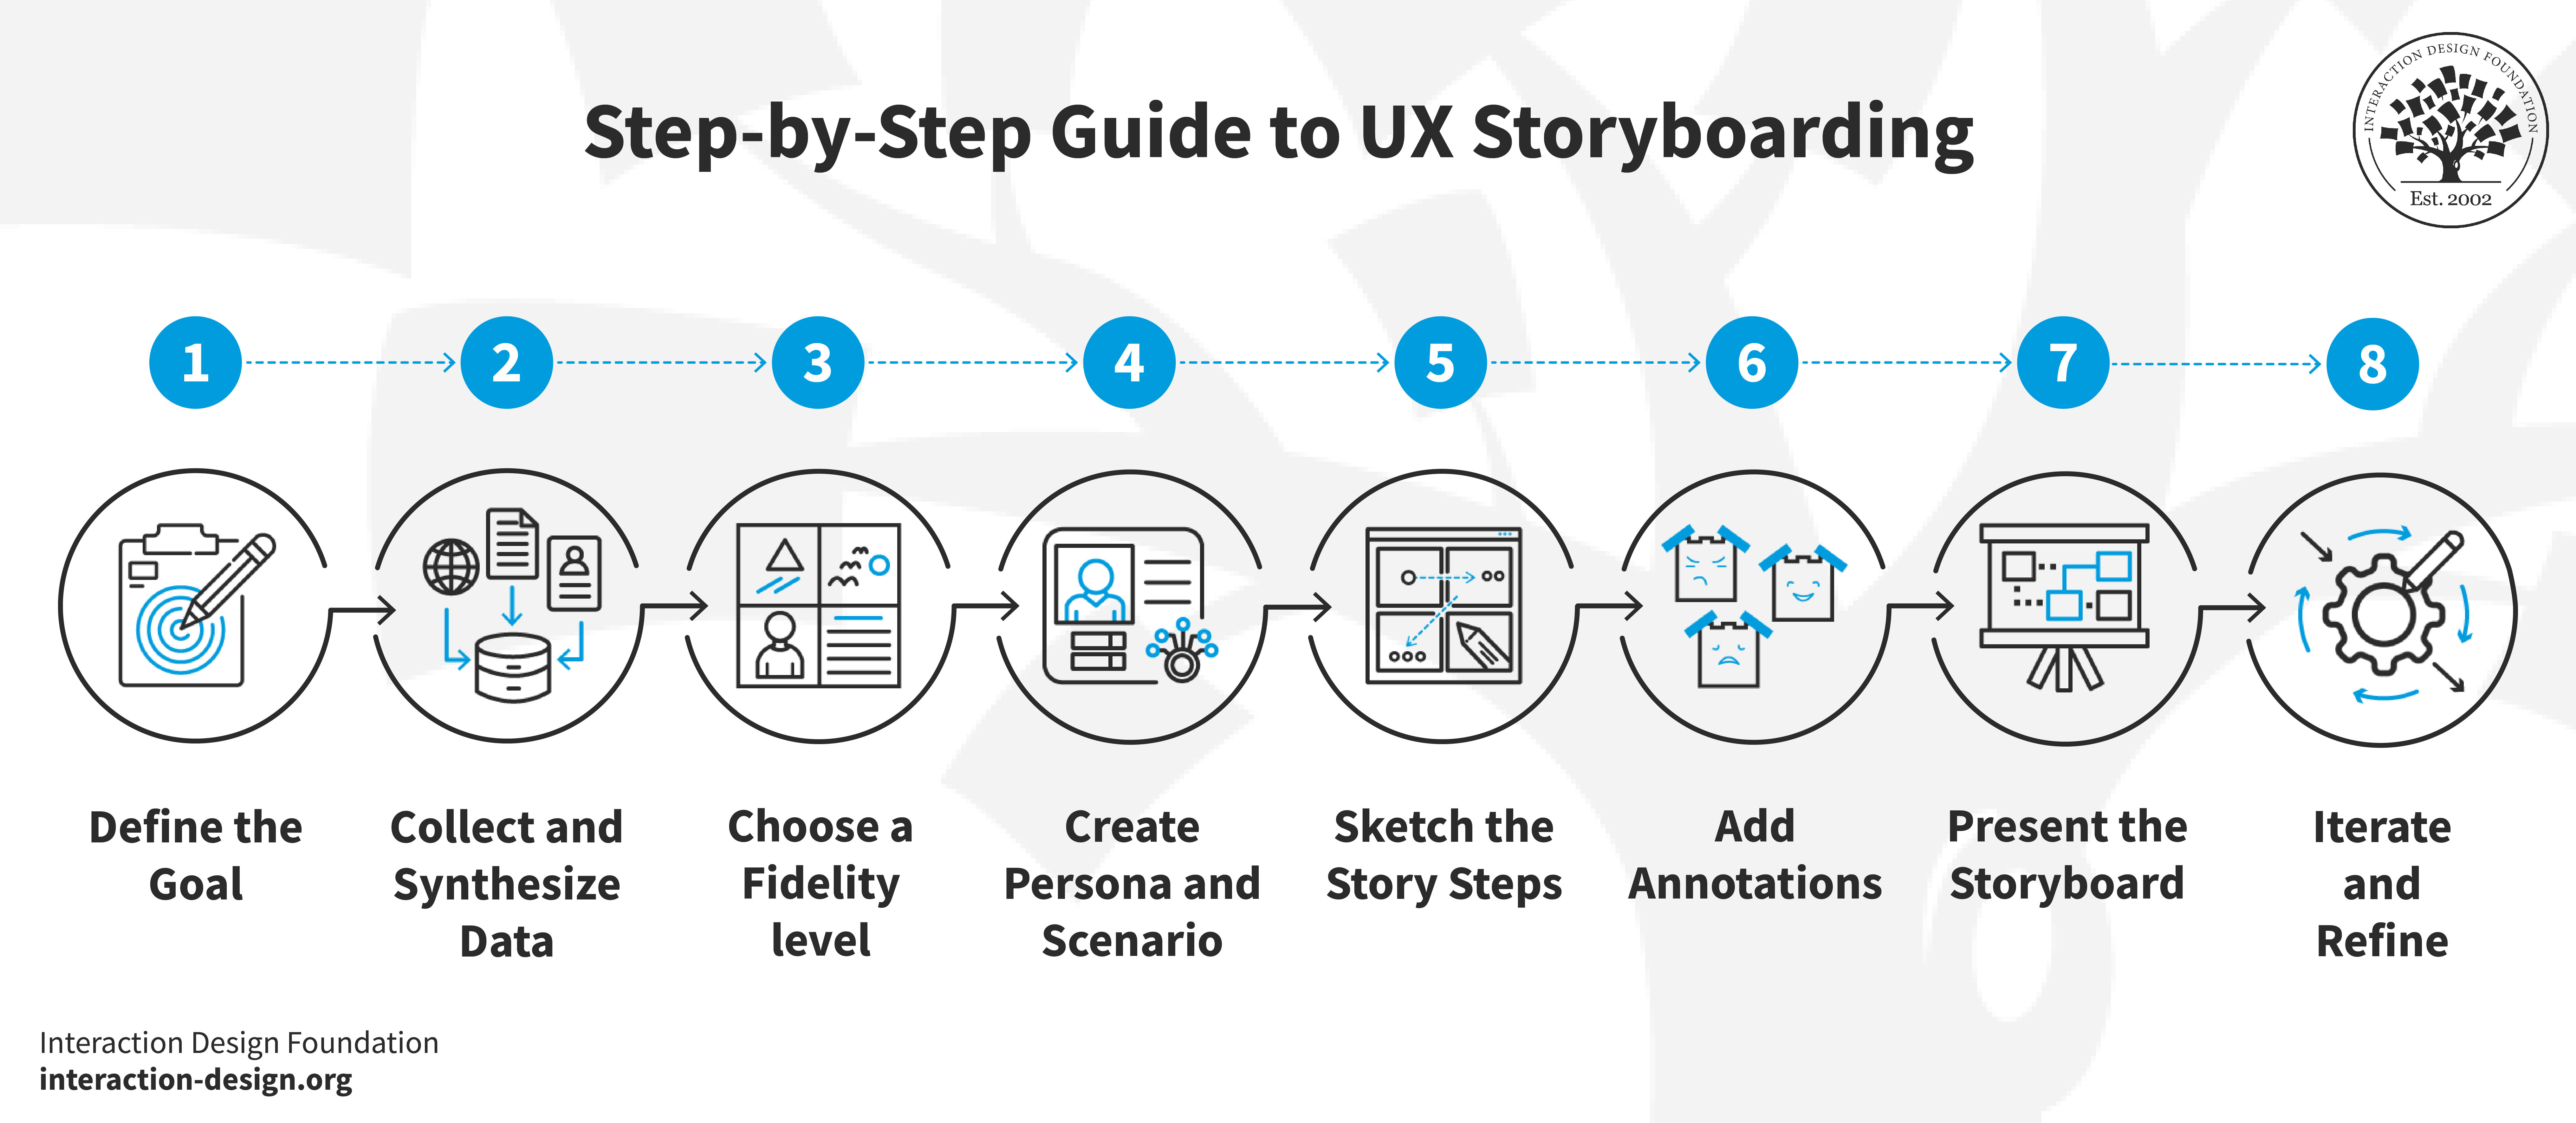 Steps to create a UX storyboard